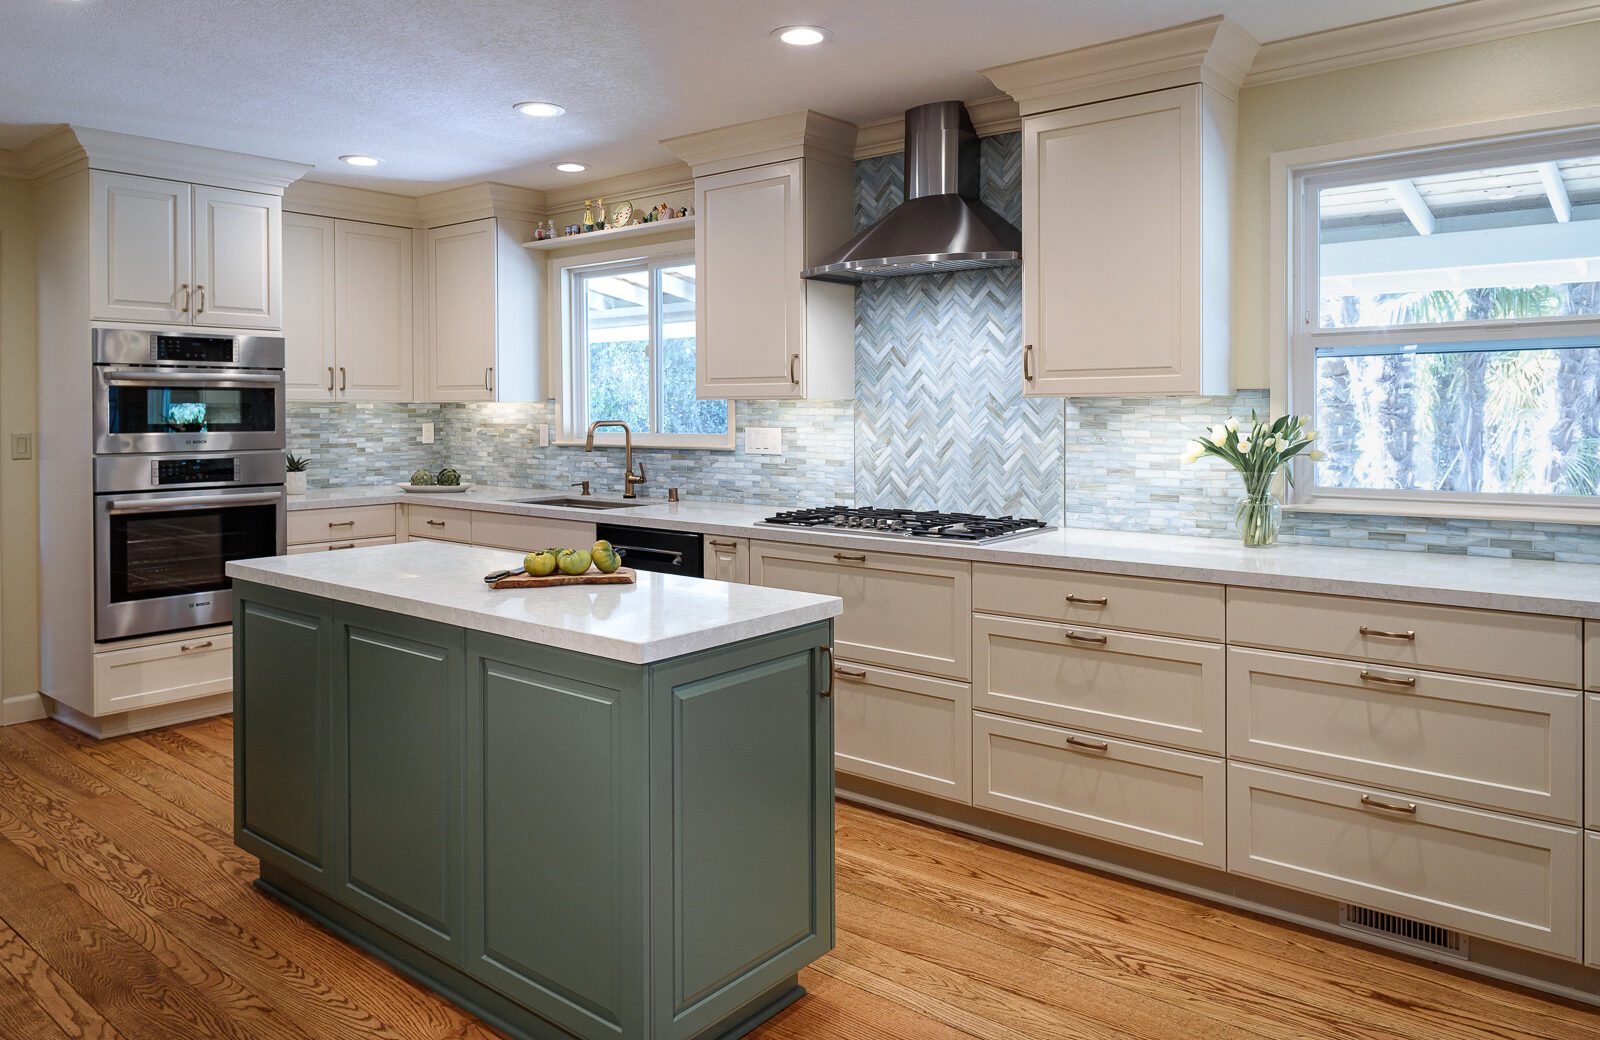 Green island, white painted cabinets